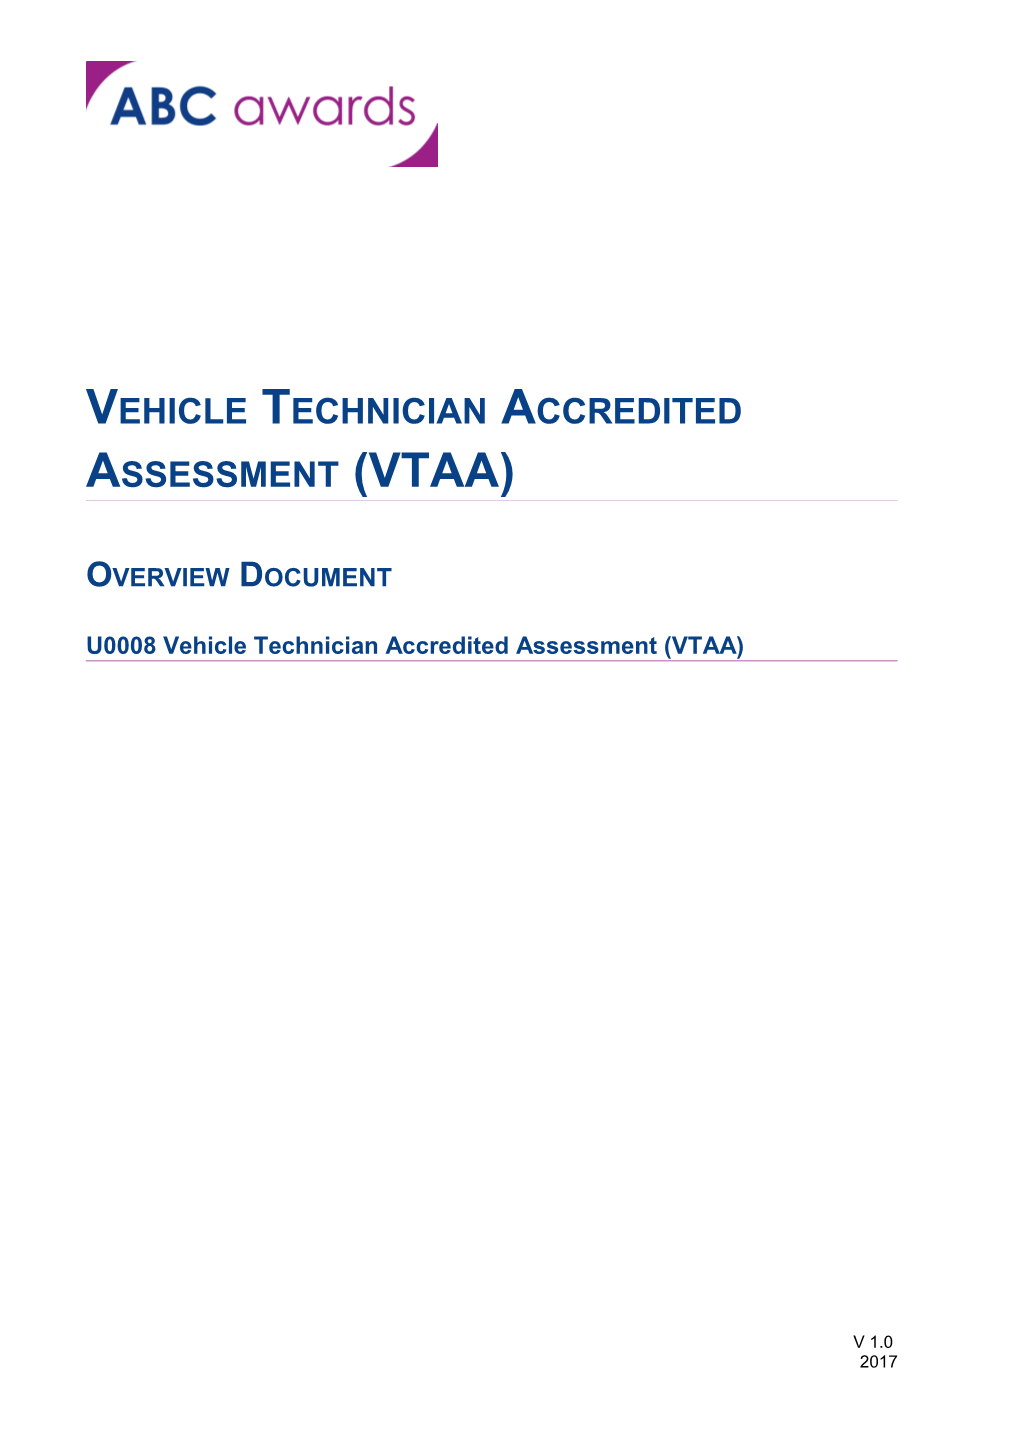 Vehicle Technician Accredited Assessment (VTAA)